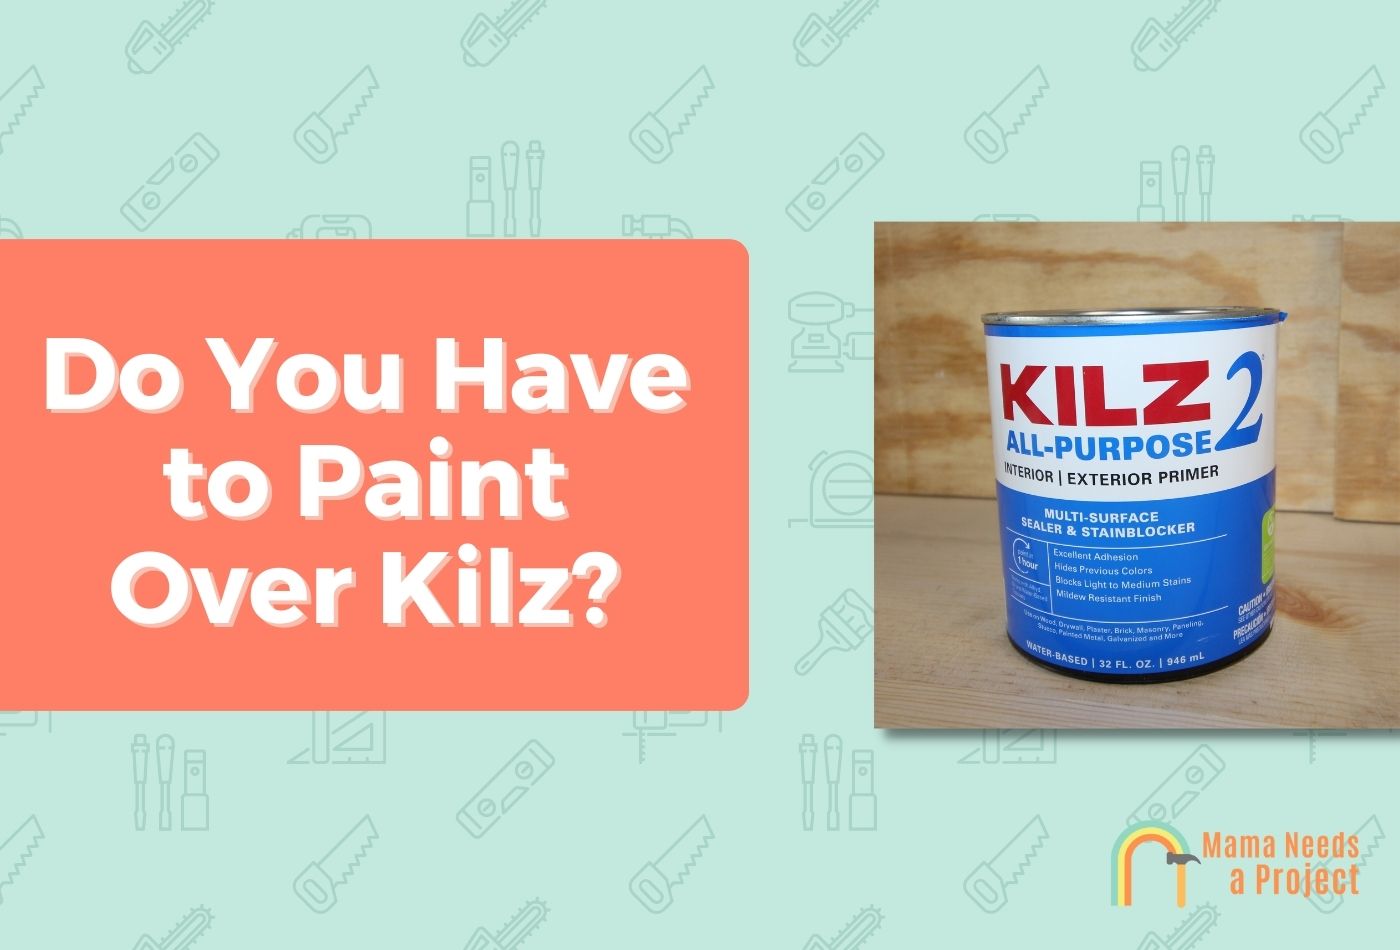 Do You Have to Paint Over Kilz